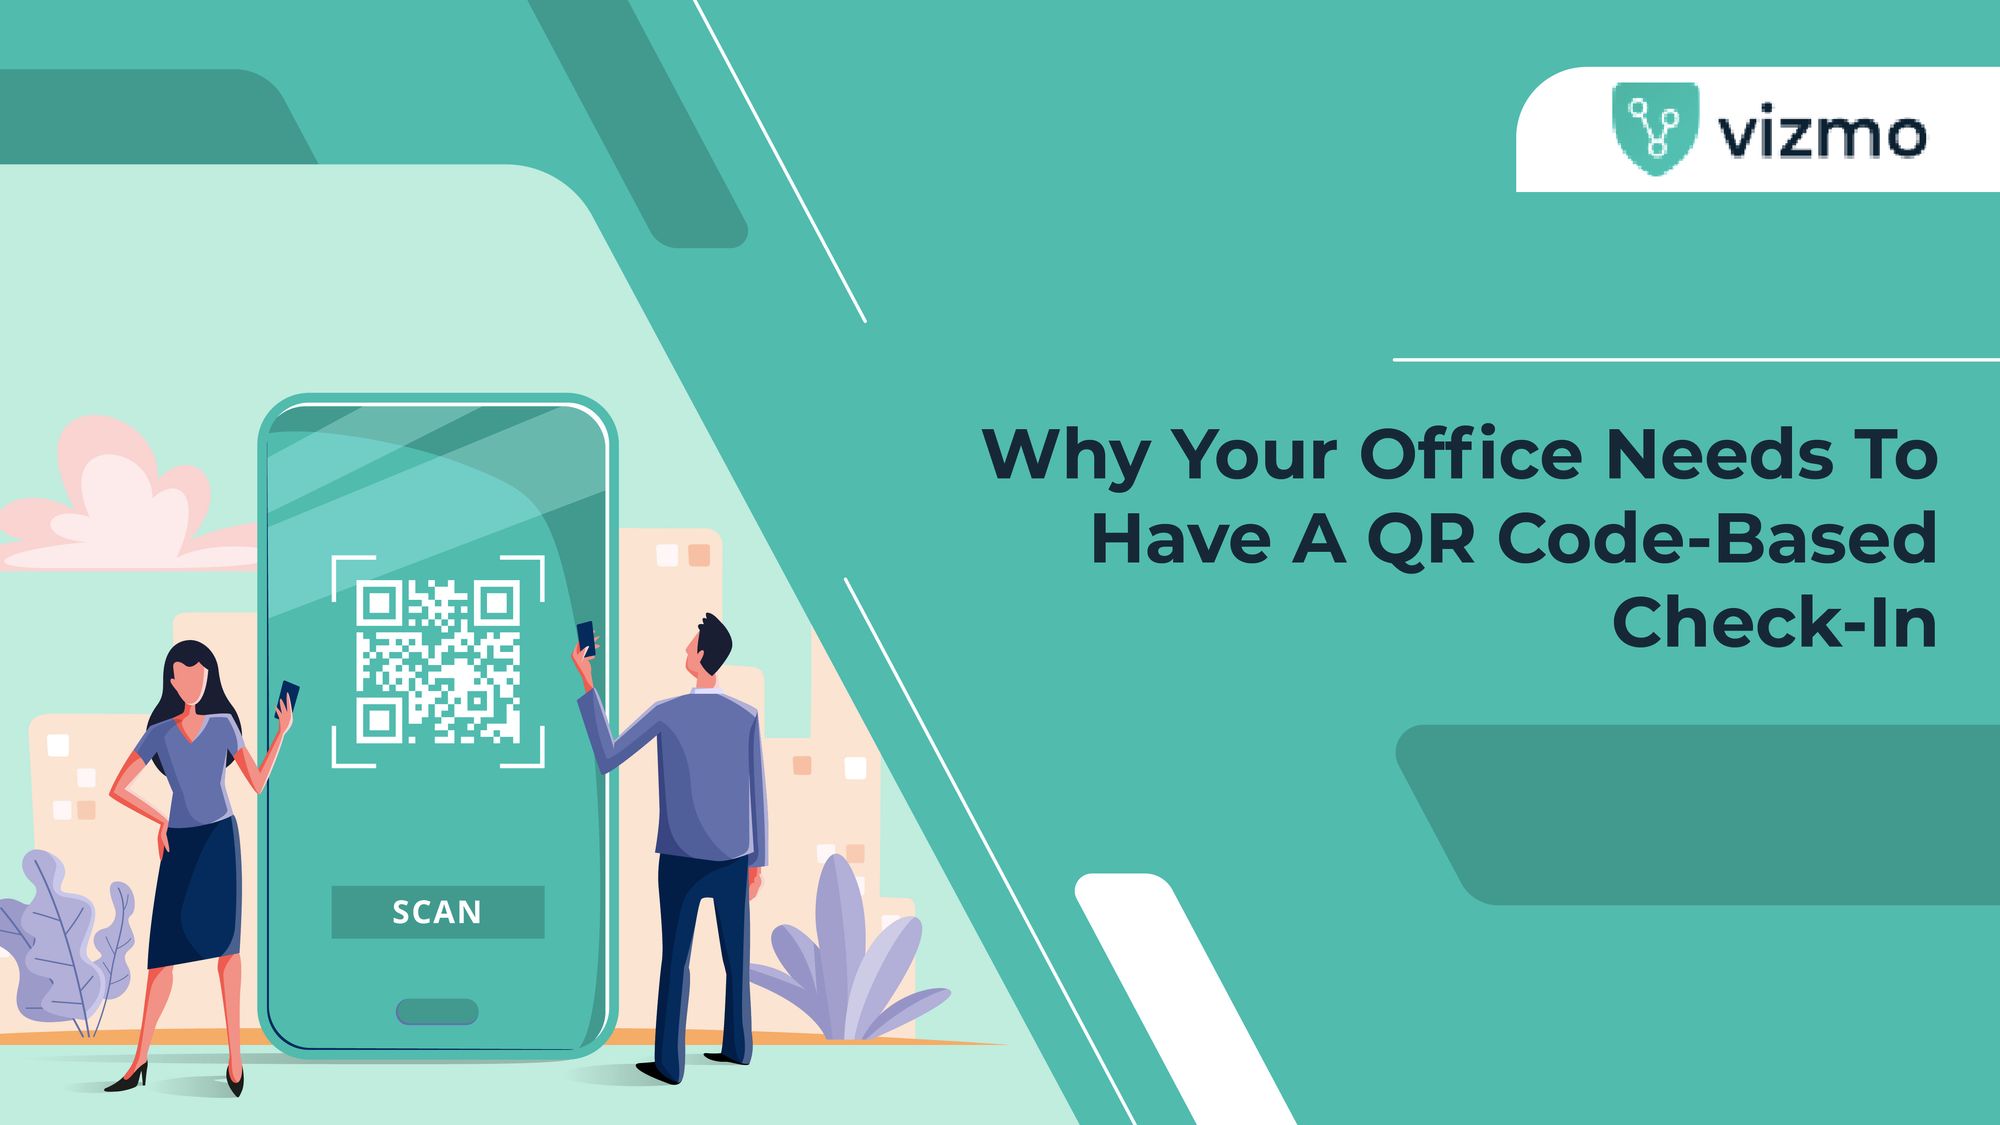 Why Your Office Needs To Have A QR Code-Based Check-In